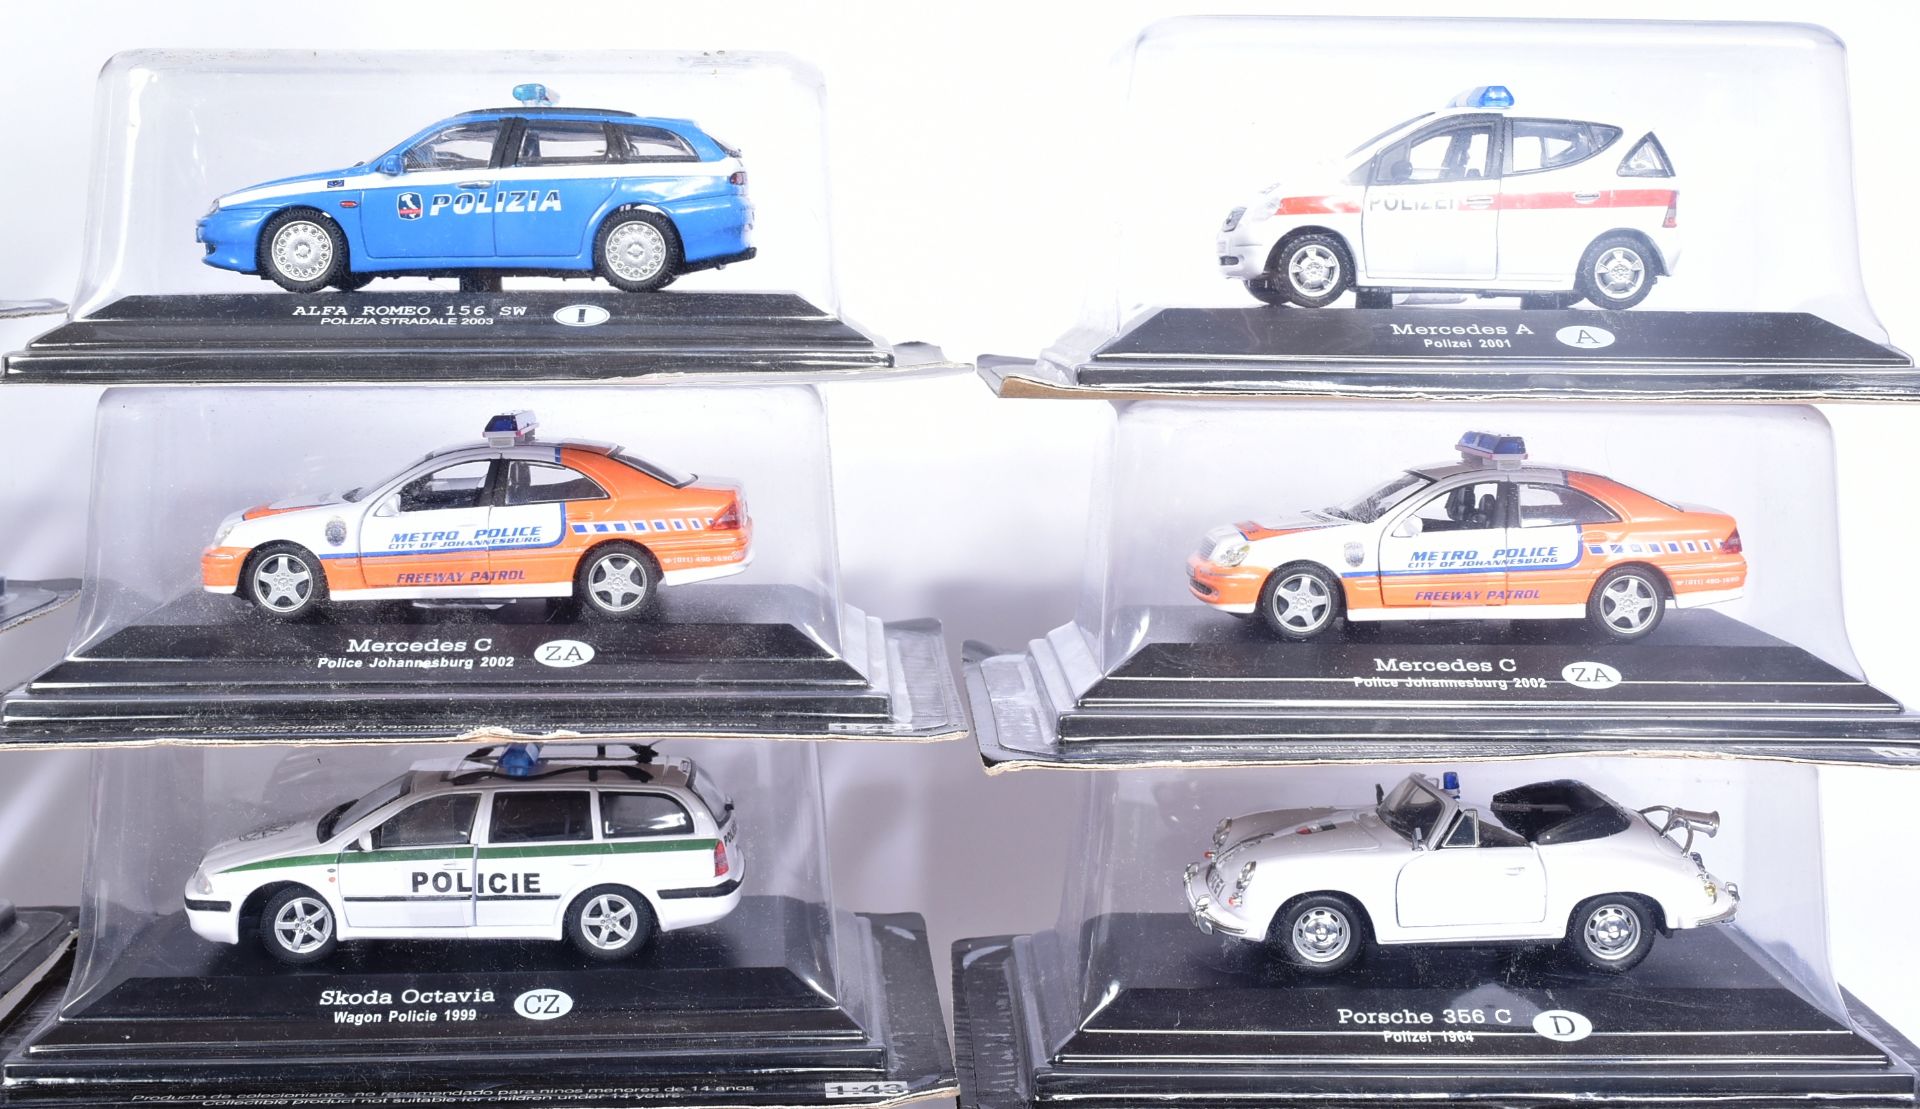 DIECAST - COLLECTION OF 1/43 SCALE DIECAST MODEL POLICE CARS - Image 2 of 5